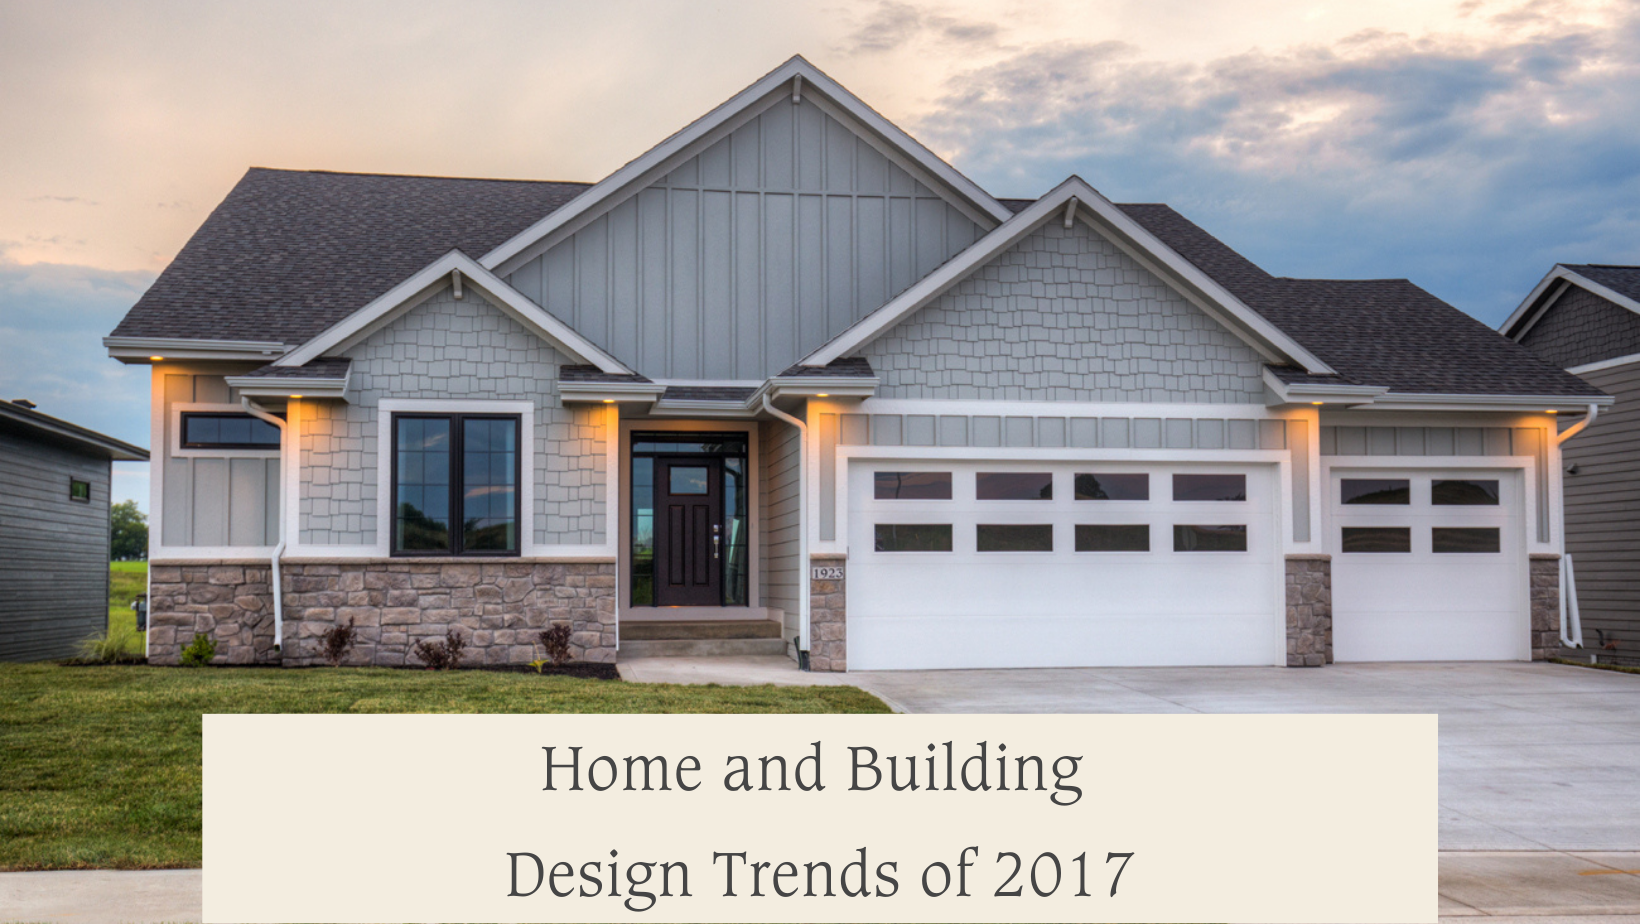 Home and Building Design Trends of 2017